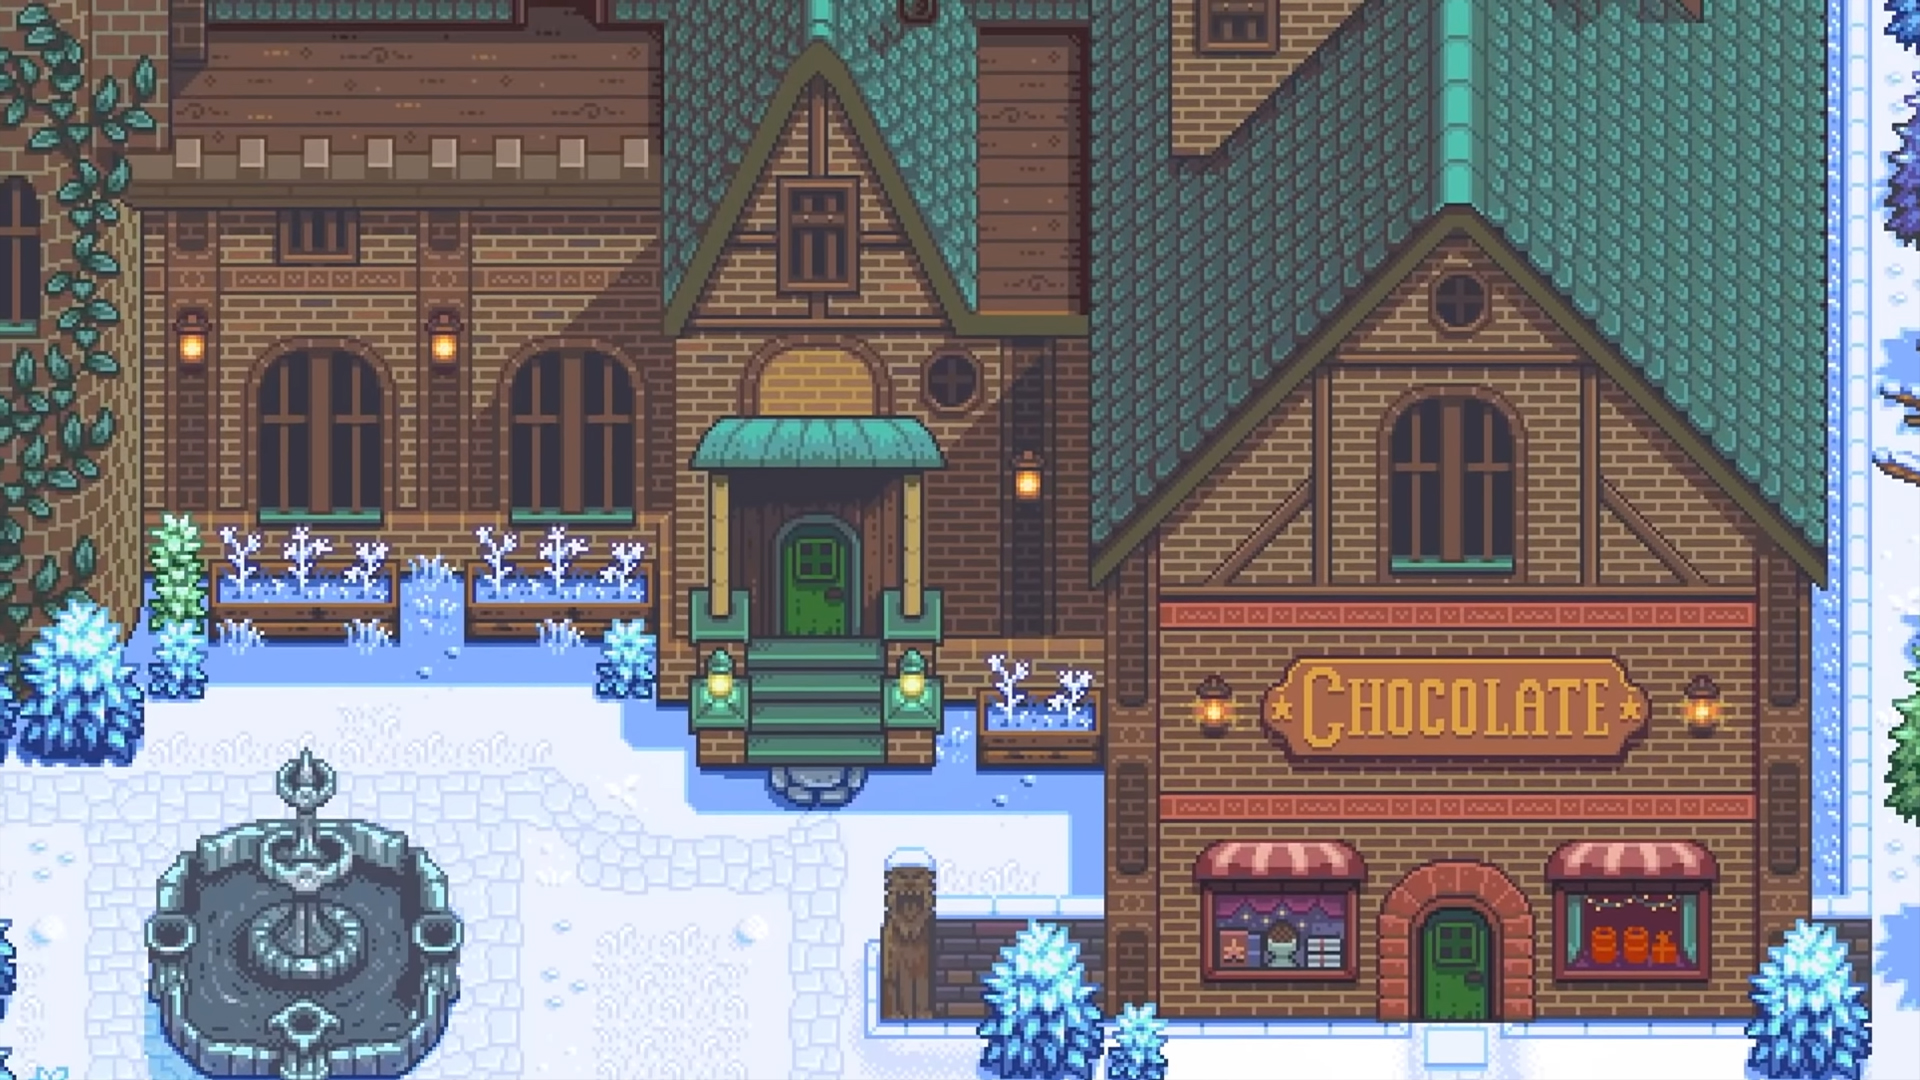 Haunted Chocolatier release date speculation, trailers, and news